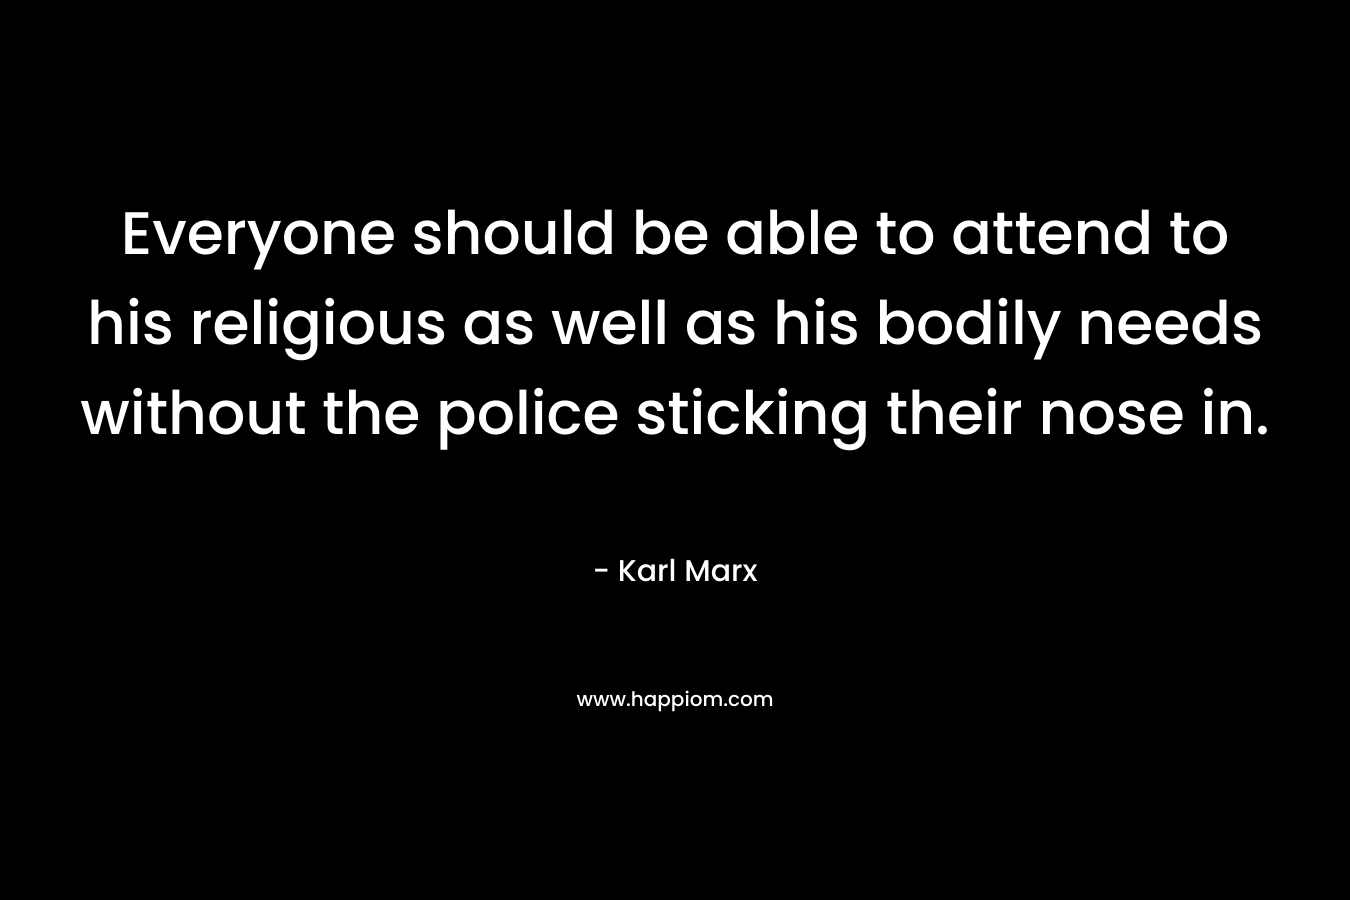 Everyone should be able to attend to his religious as well as his bodily needs without the police sticking their nose in. – Karl Marx